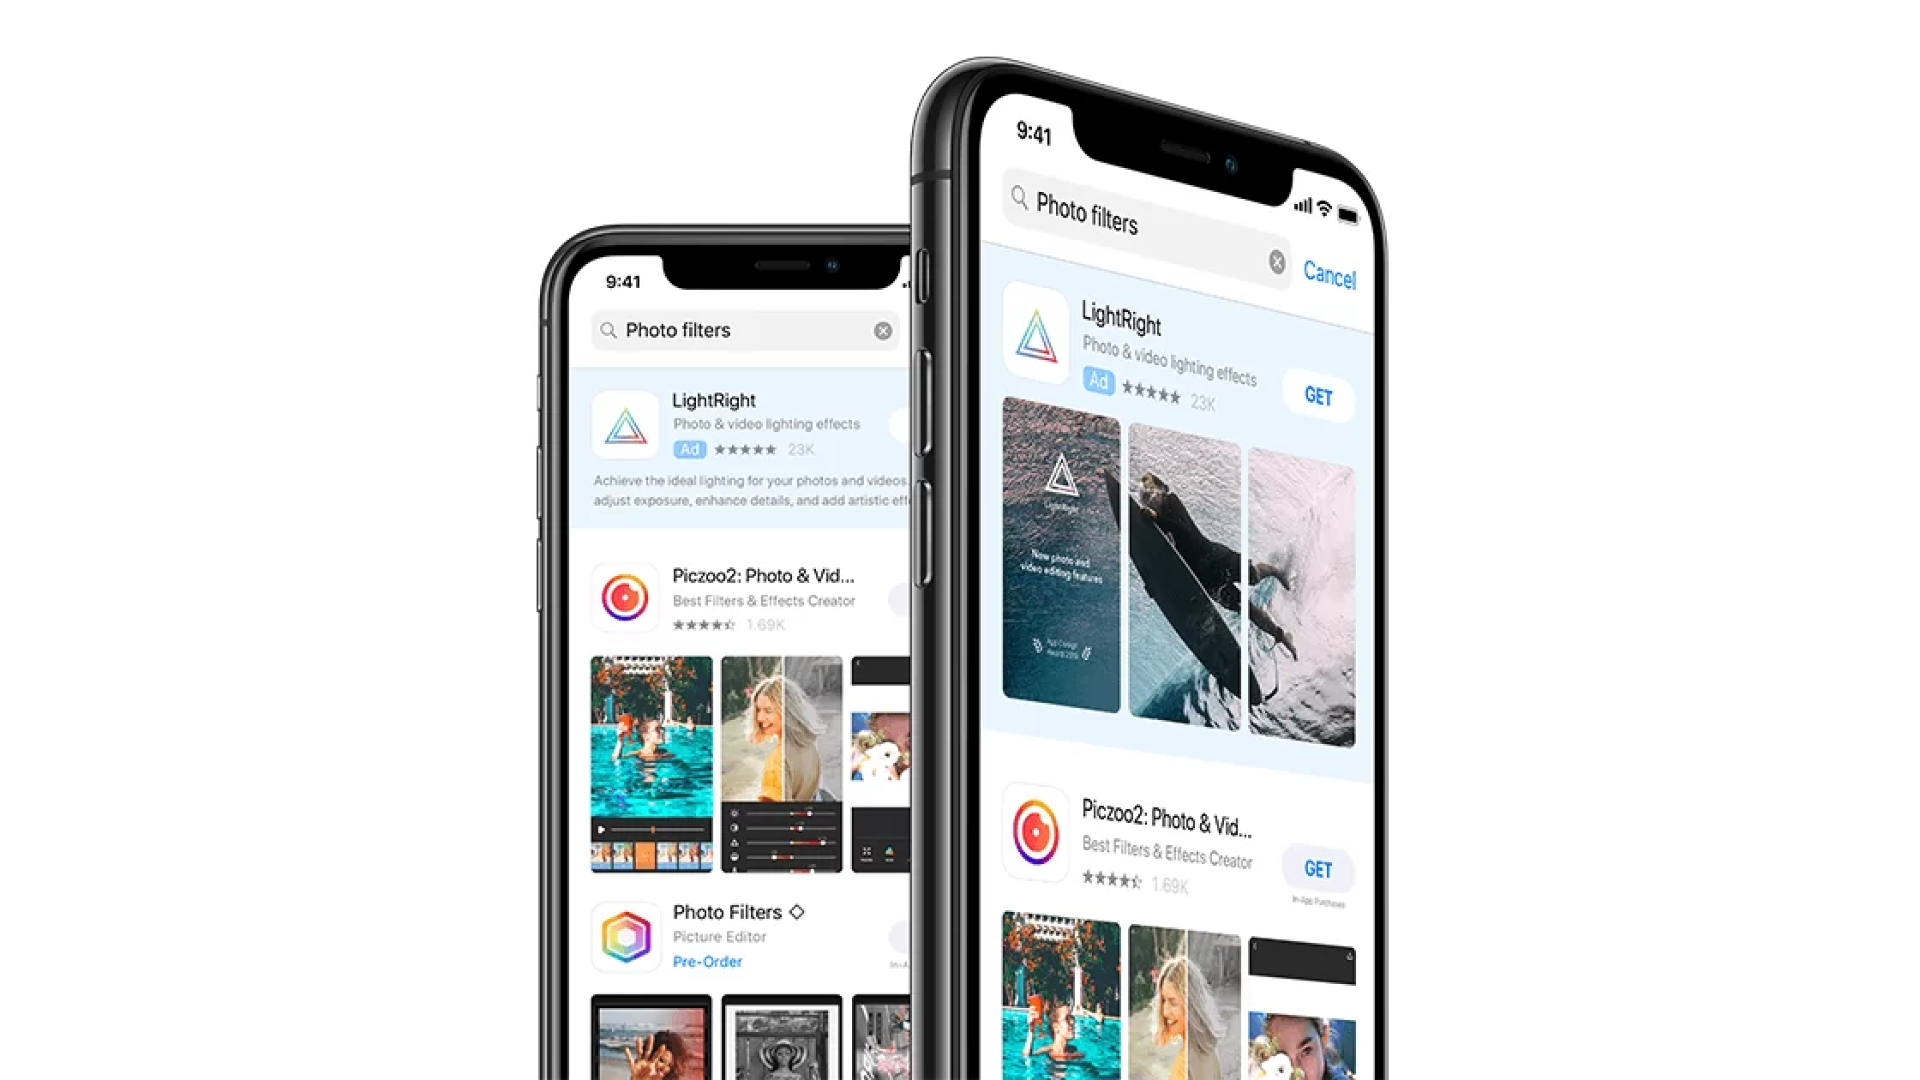 Apple Search Ads: What to Know Before Promoting Your App